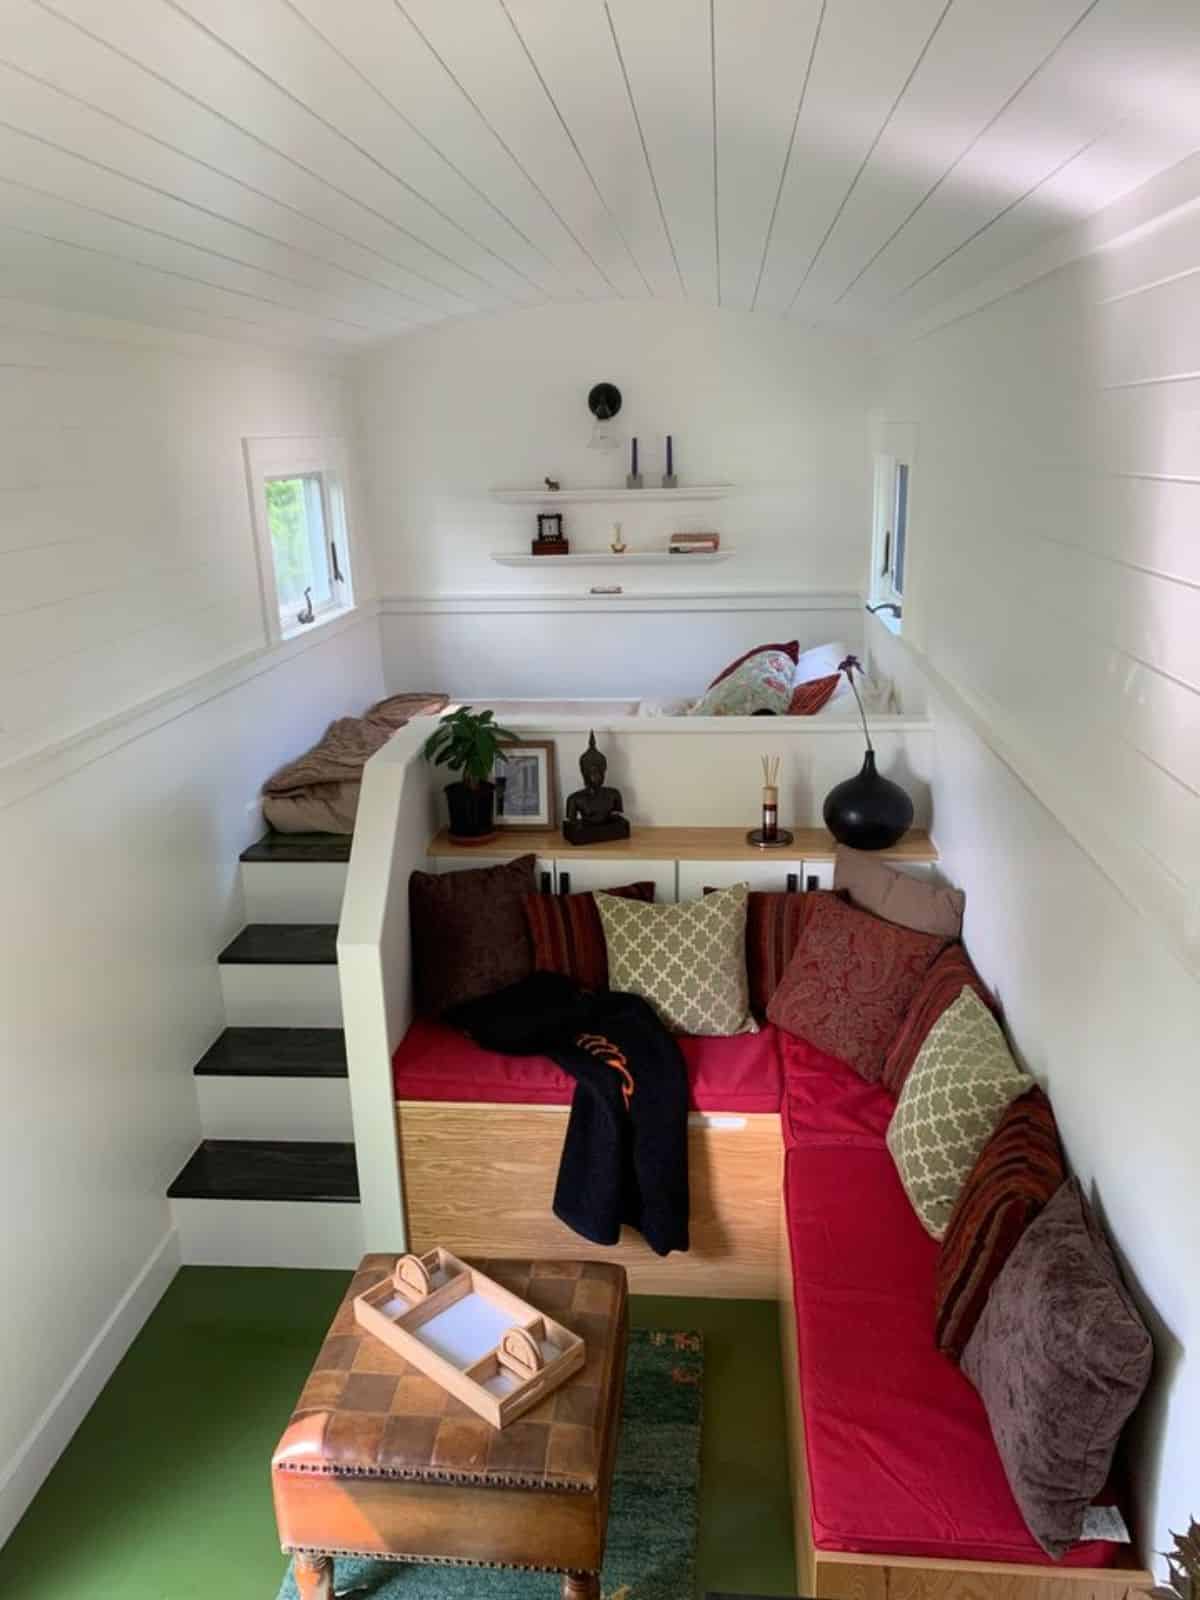 full length stunning interiors of Brand new tiny home from kitchen view